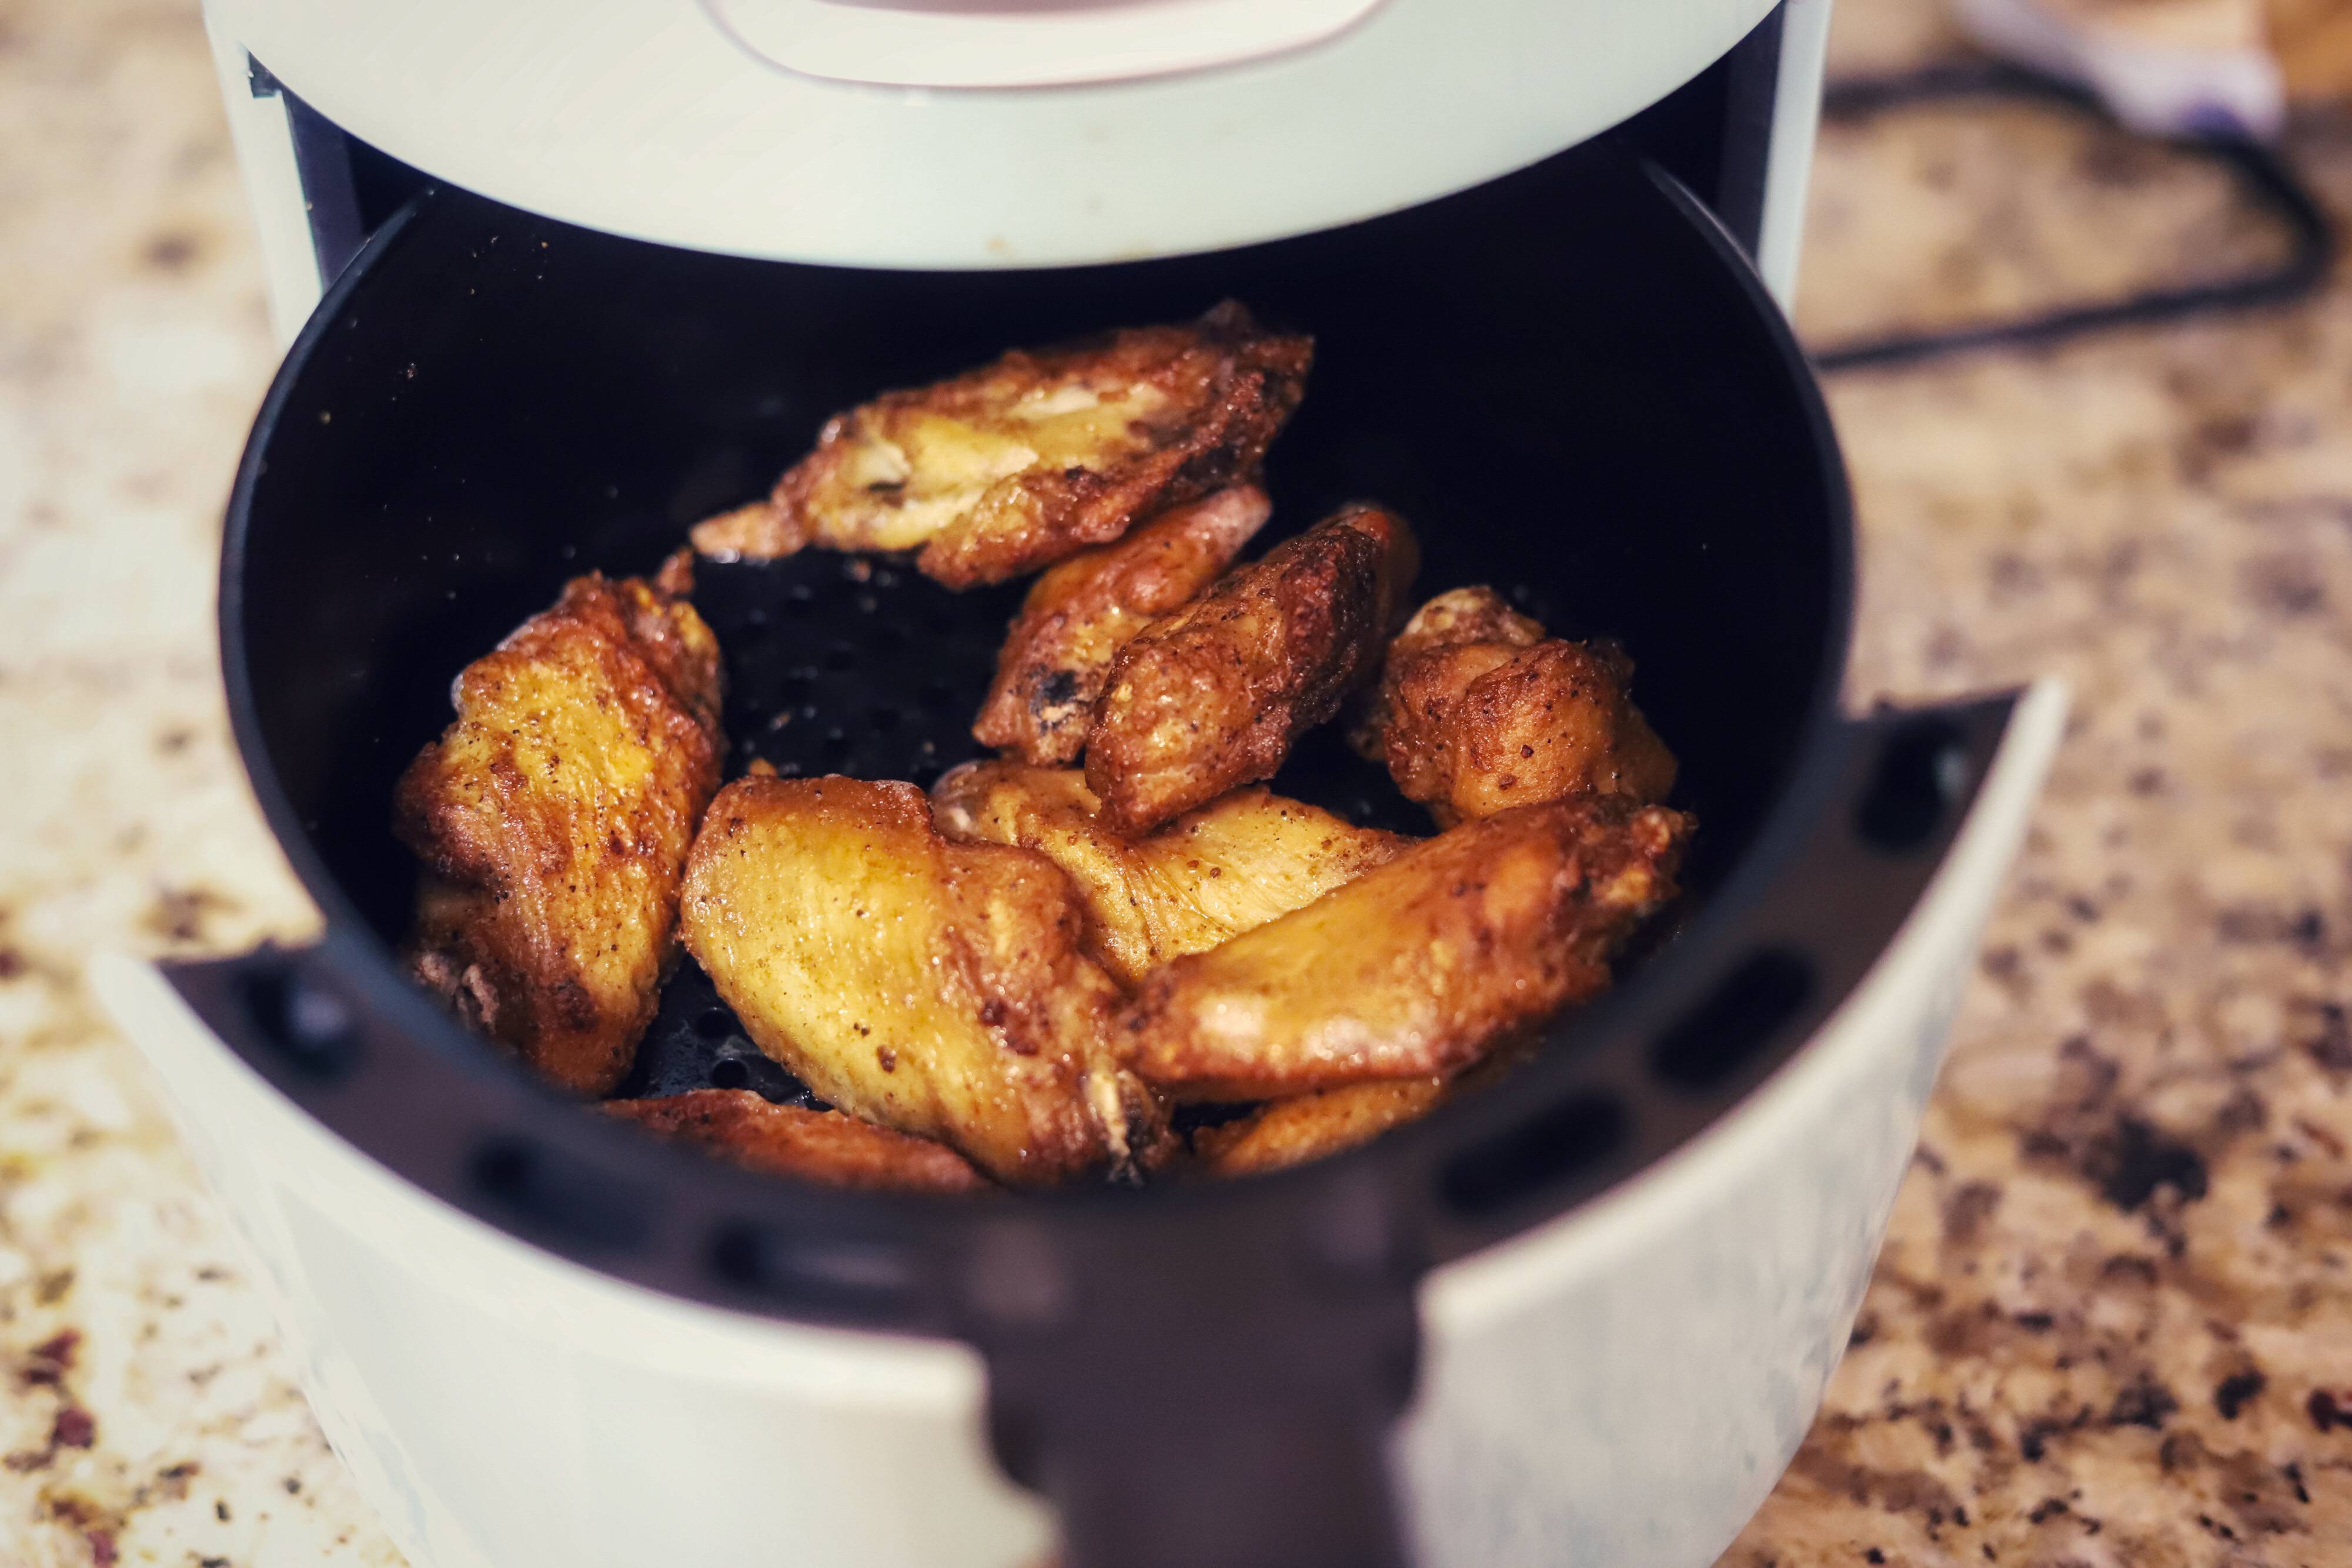 Reviewers are going nuts for the Cosori air fryer. And it's on sale at   now - CBS News